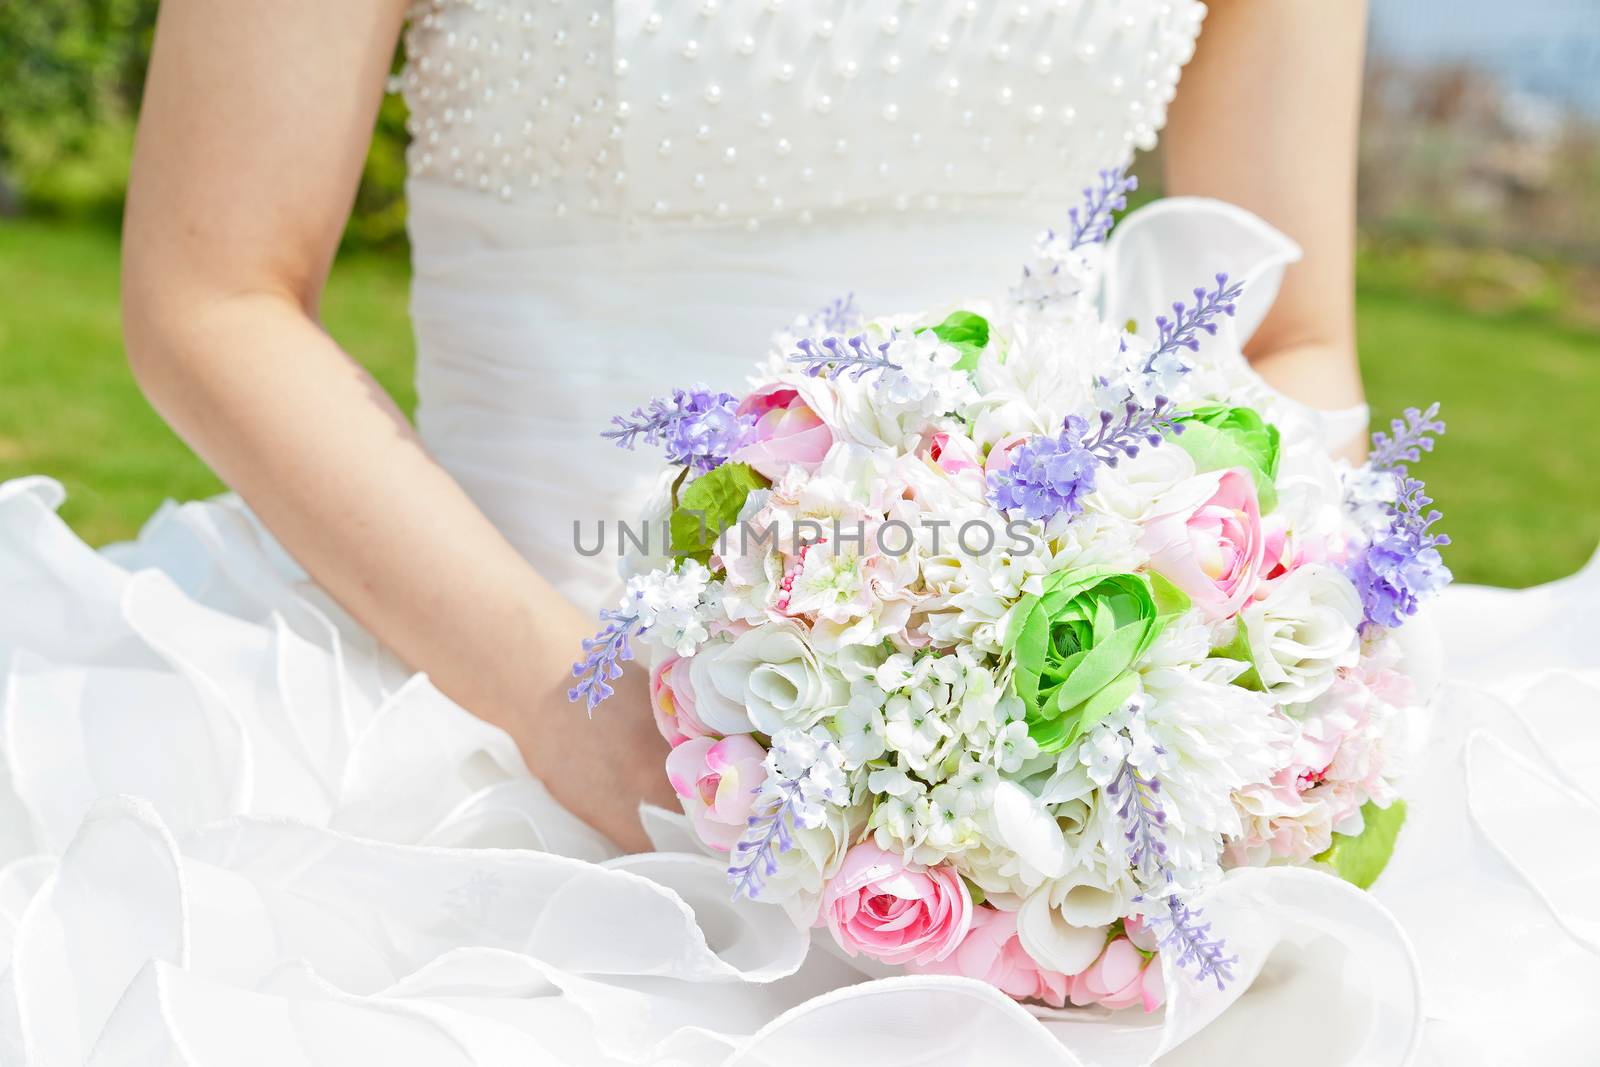 Bouquet in the hands of the bride